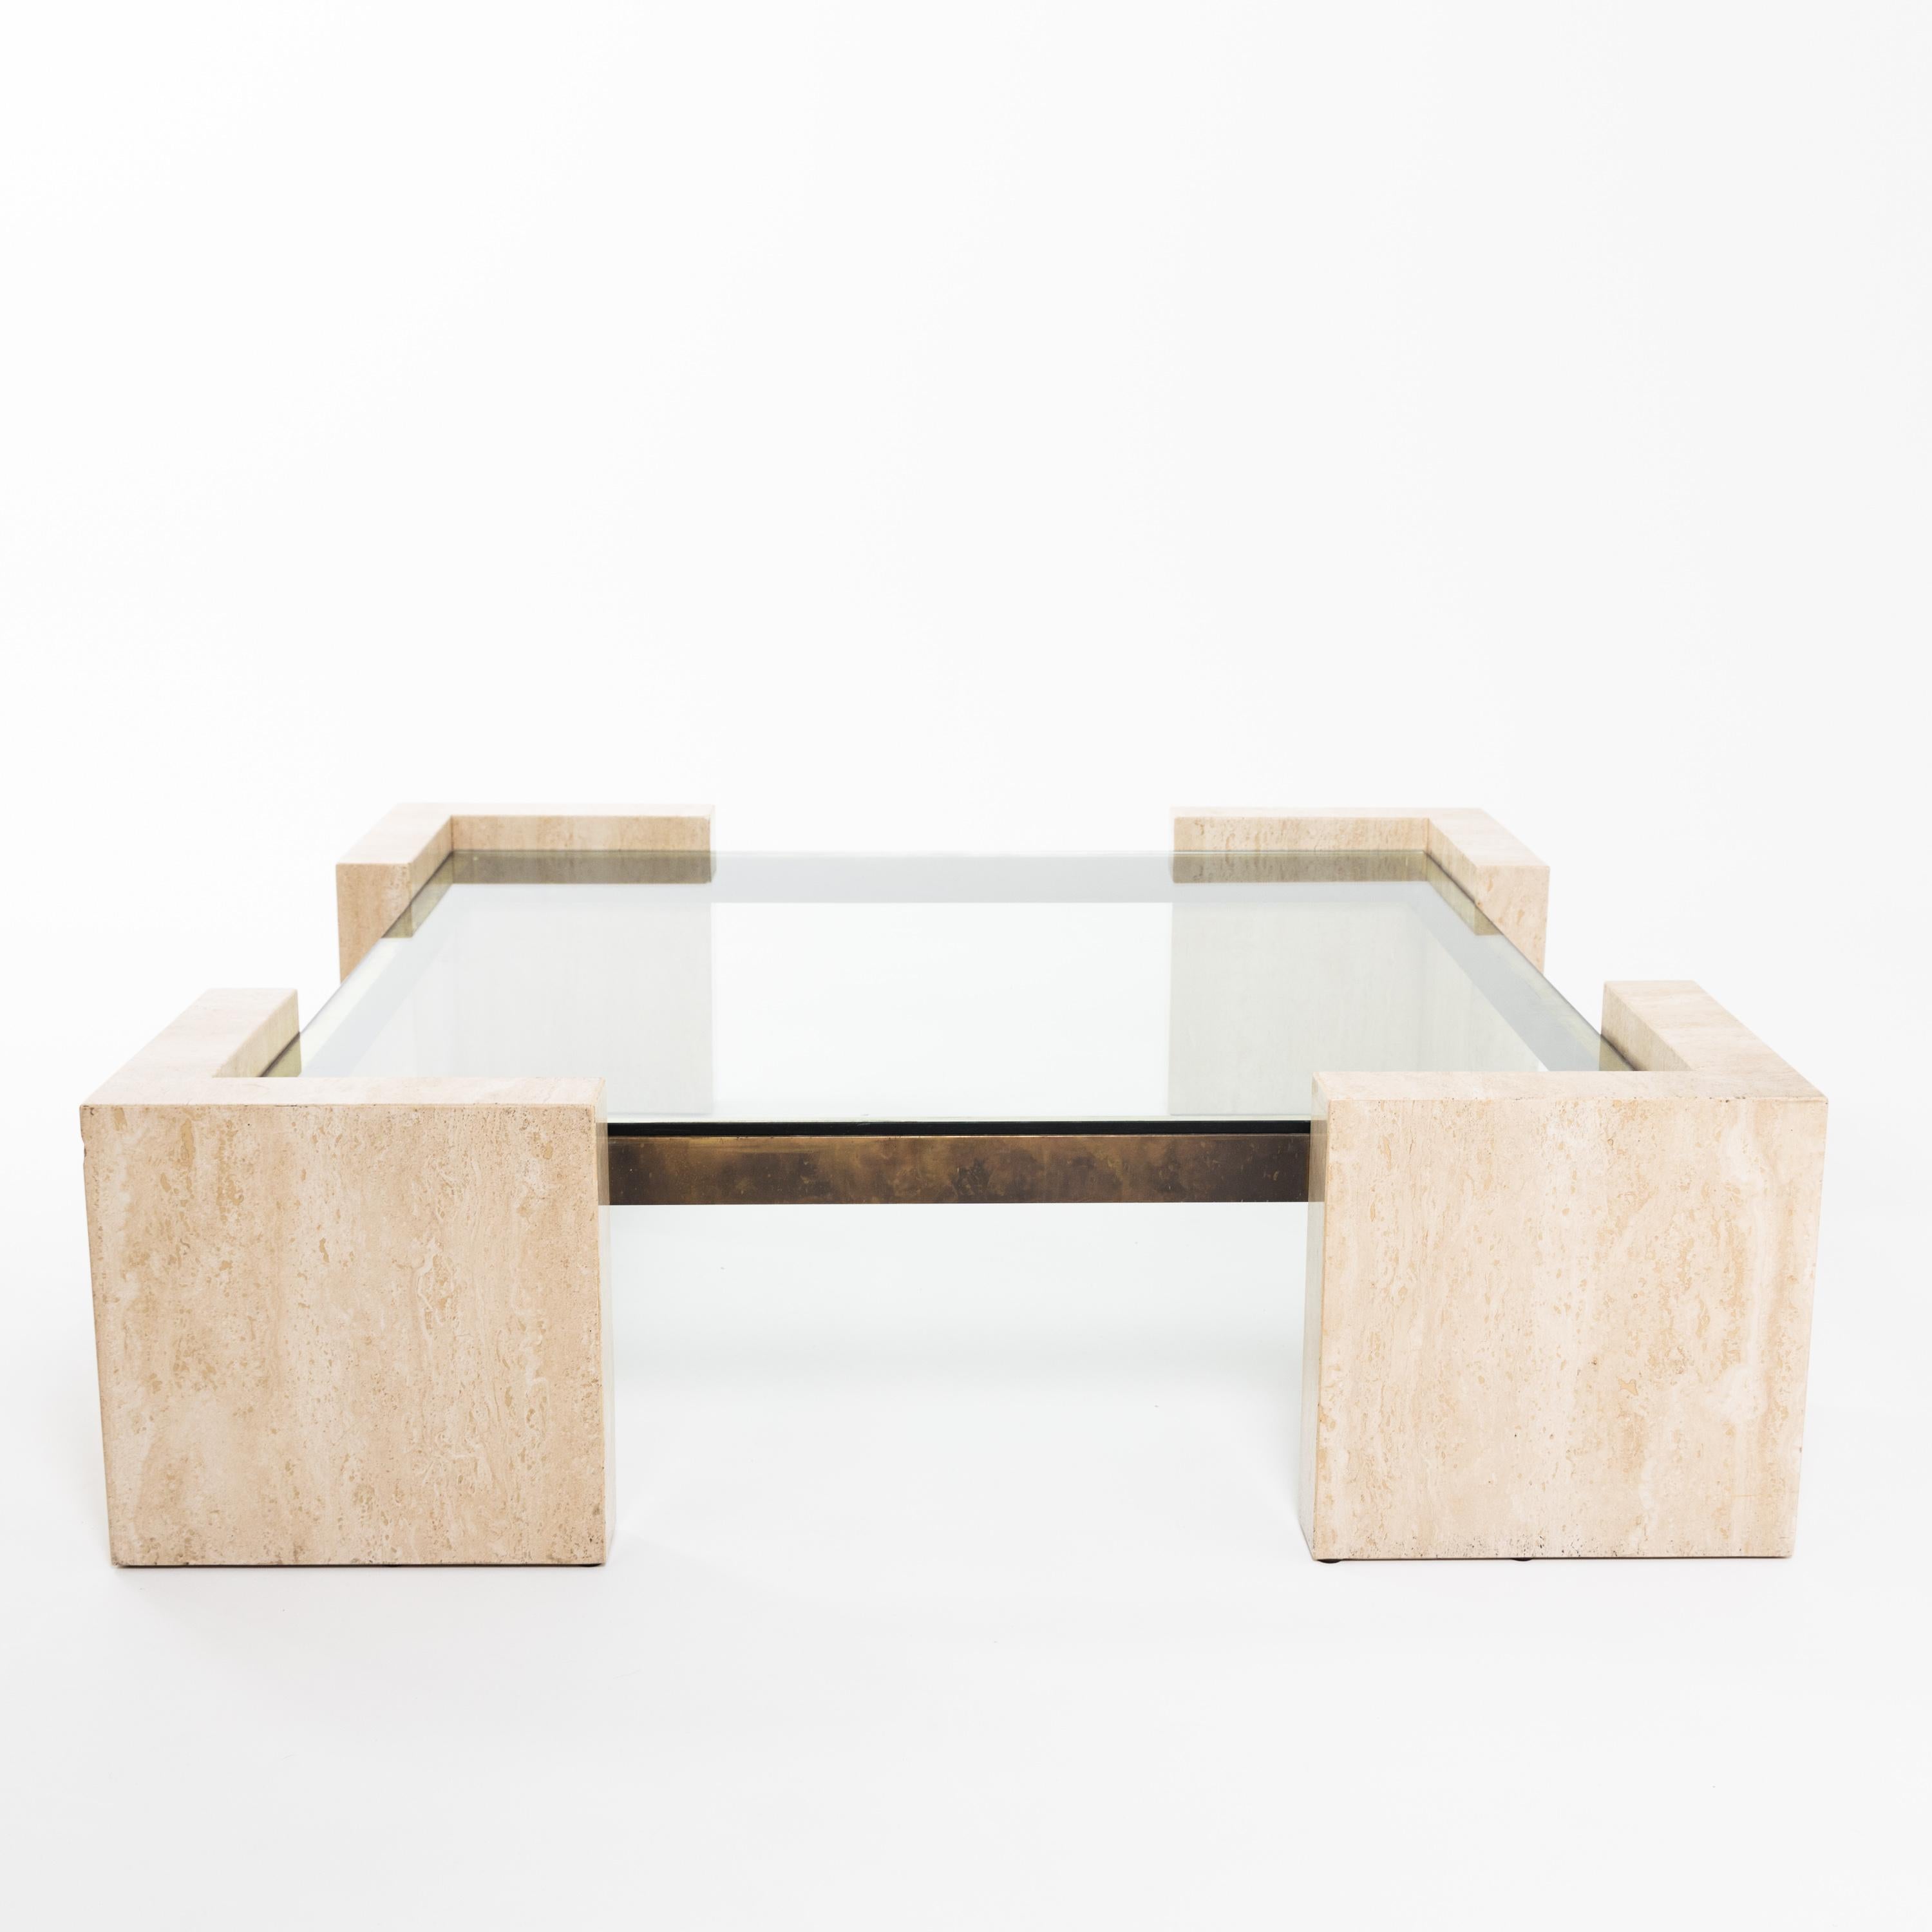 Large coffee table in square base form with brass frame, thick glass top and L-shaped supports in smooth, light beige travertine.
 